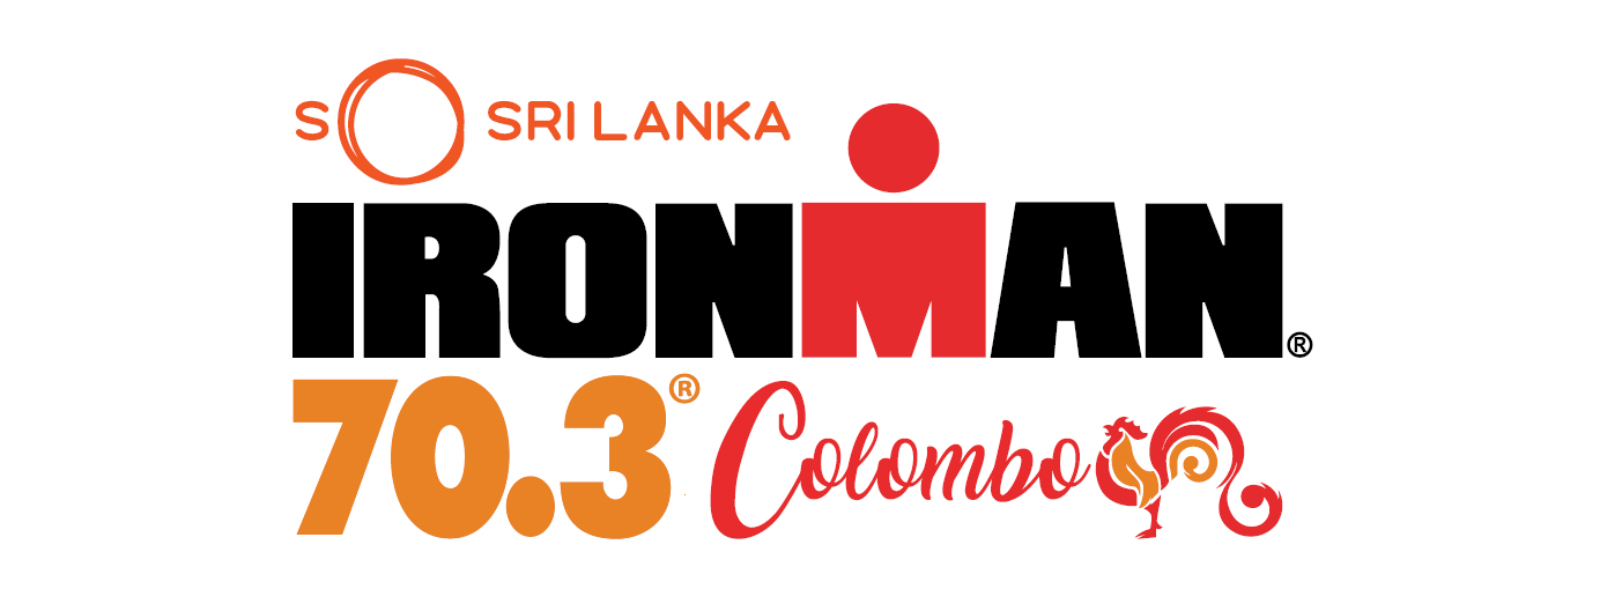 Iron Man 70.3 scheduled for the Feb 24